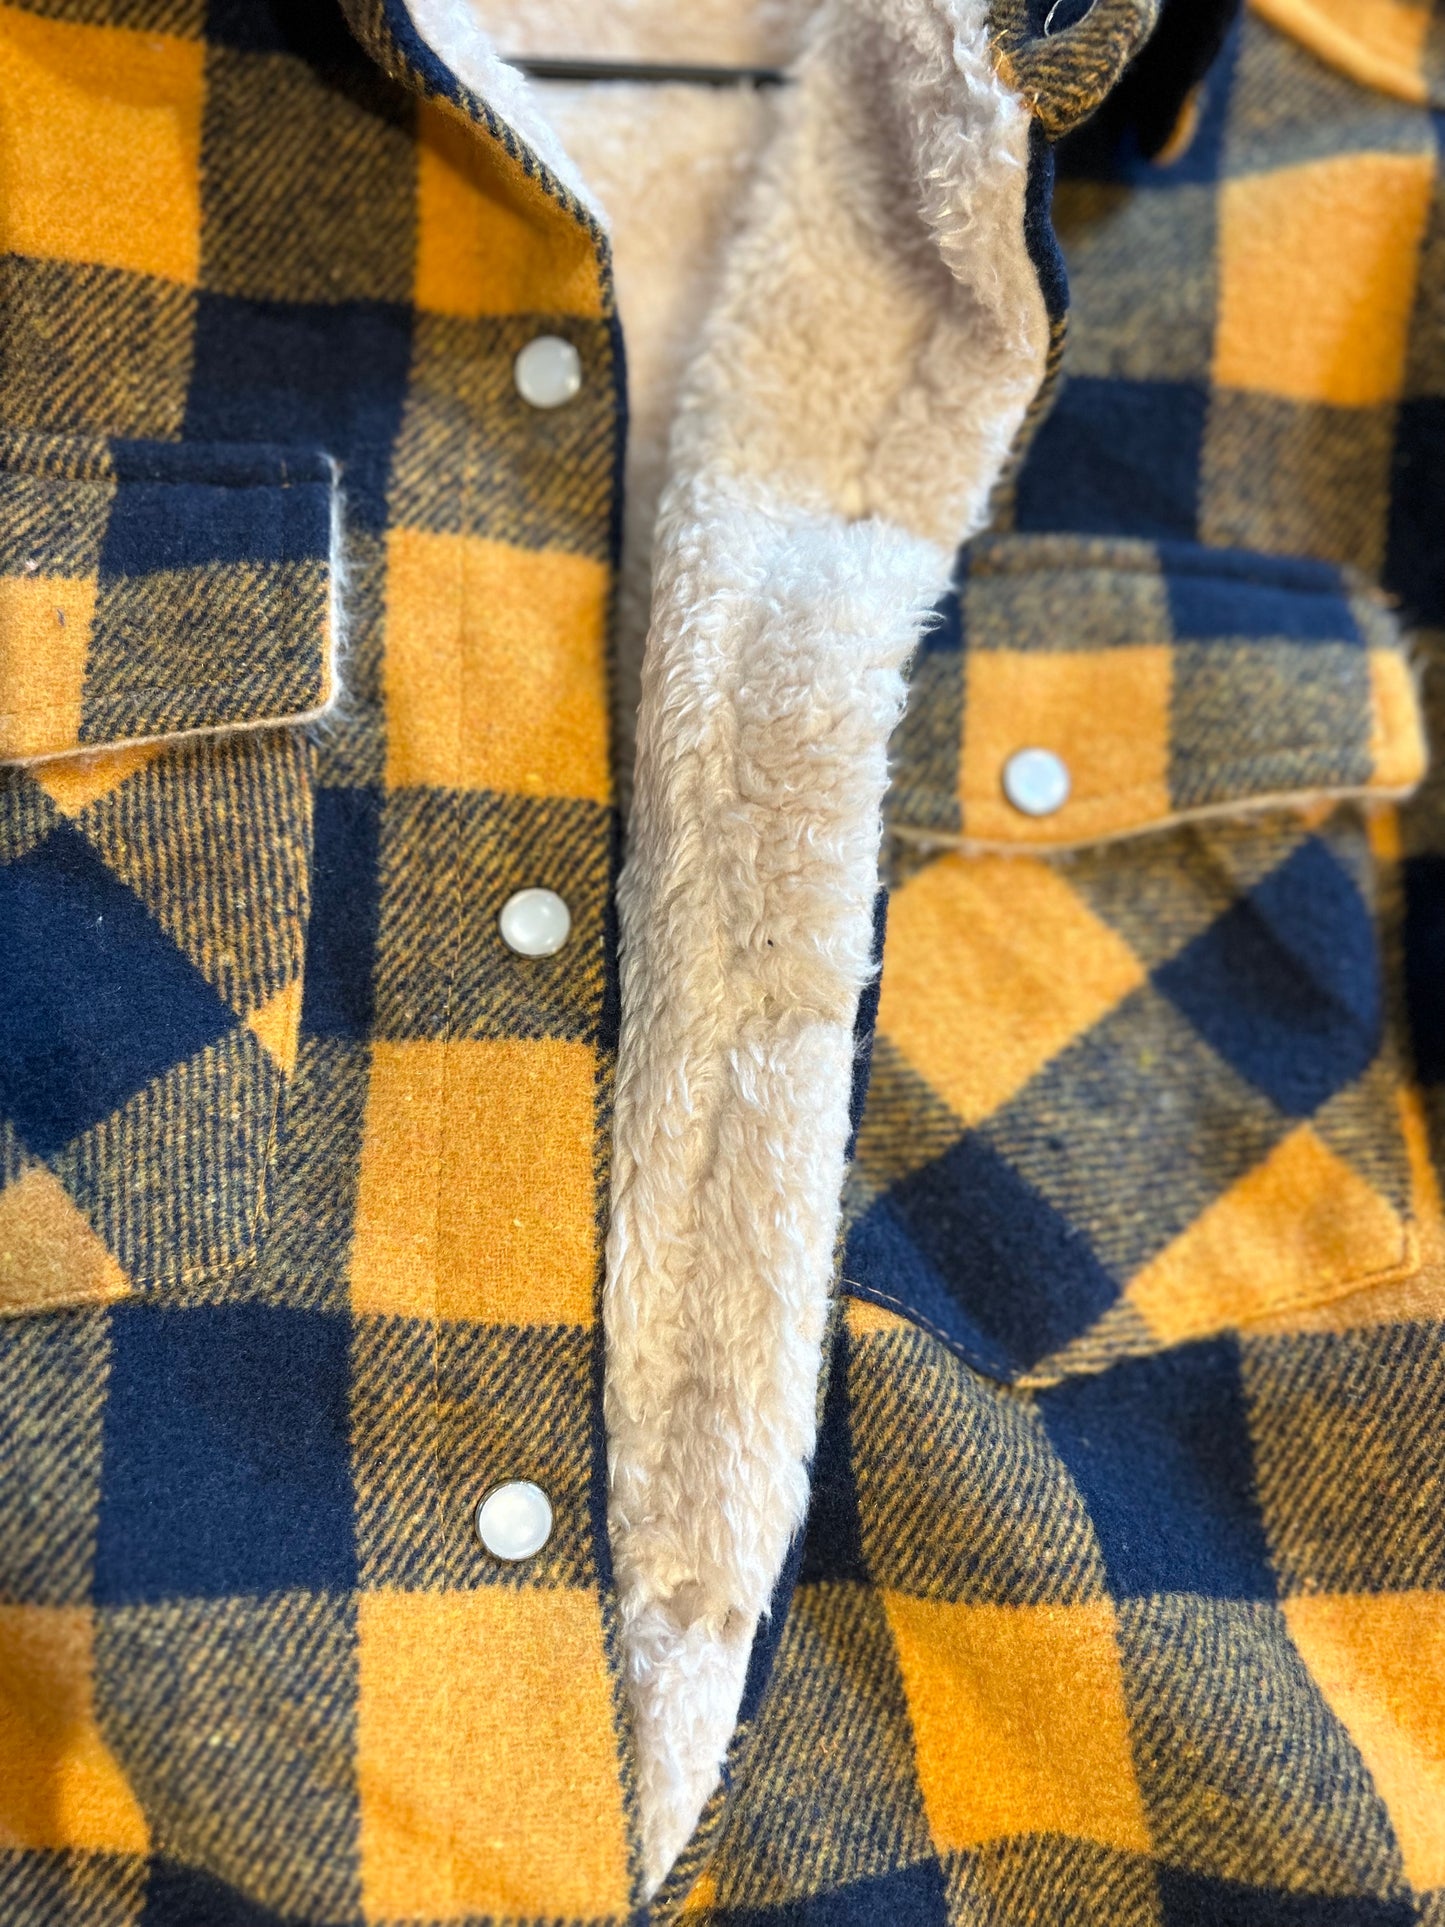 Women’s Plaid Shaket with Sherpa Lining